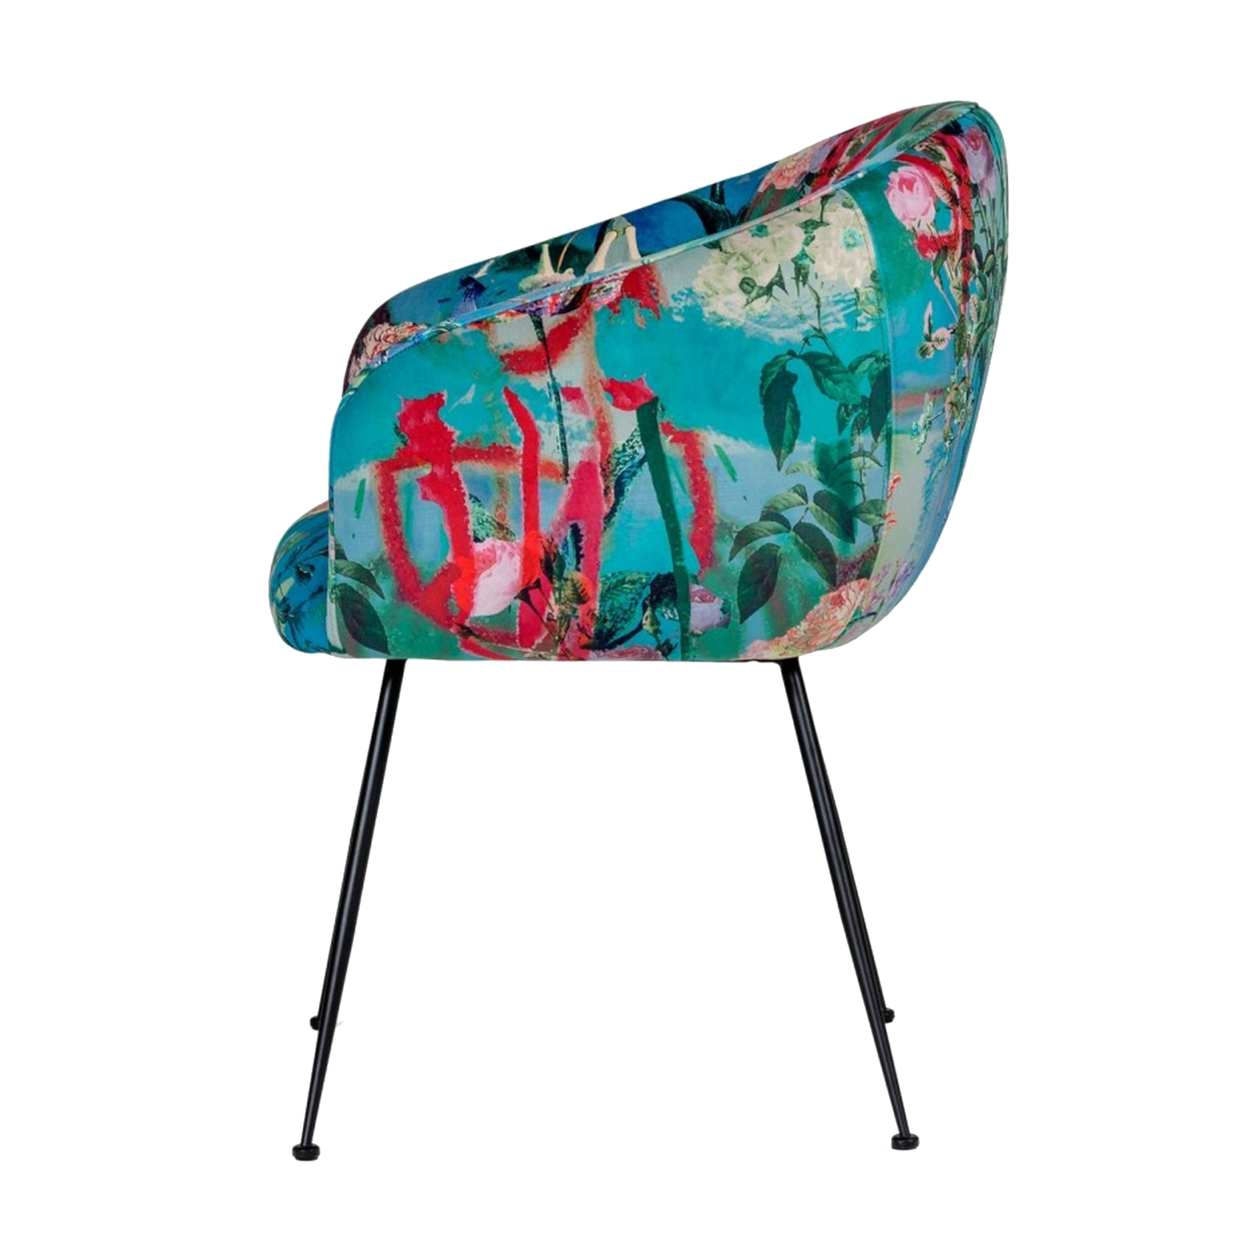 Curved Floral Pattern Fabric Dining Chair With Metal Legs, Blue- Saltoro Sherpi